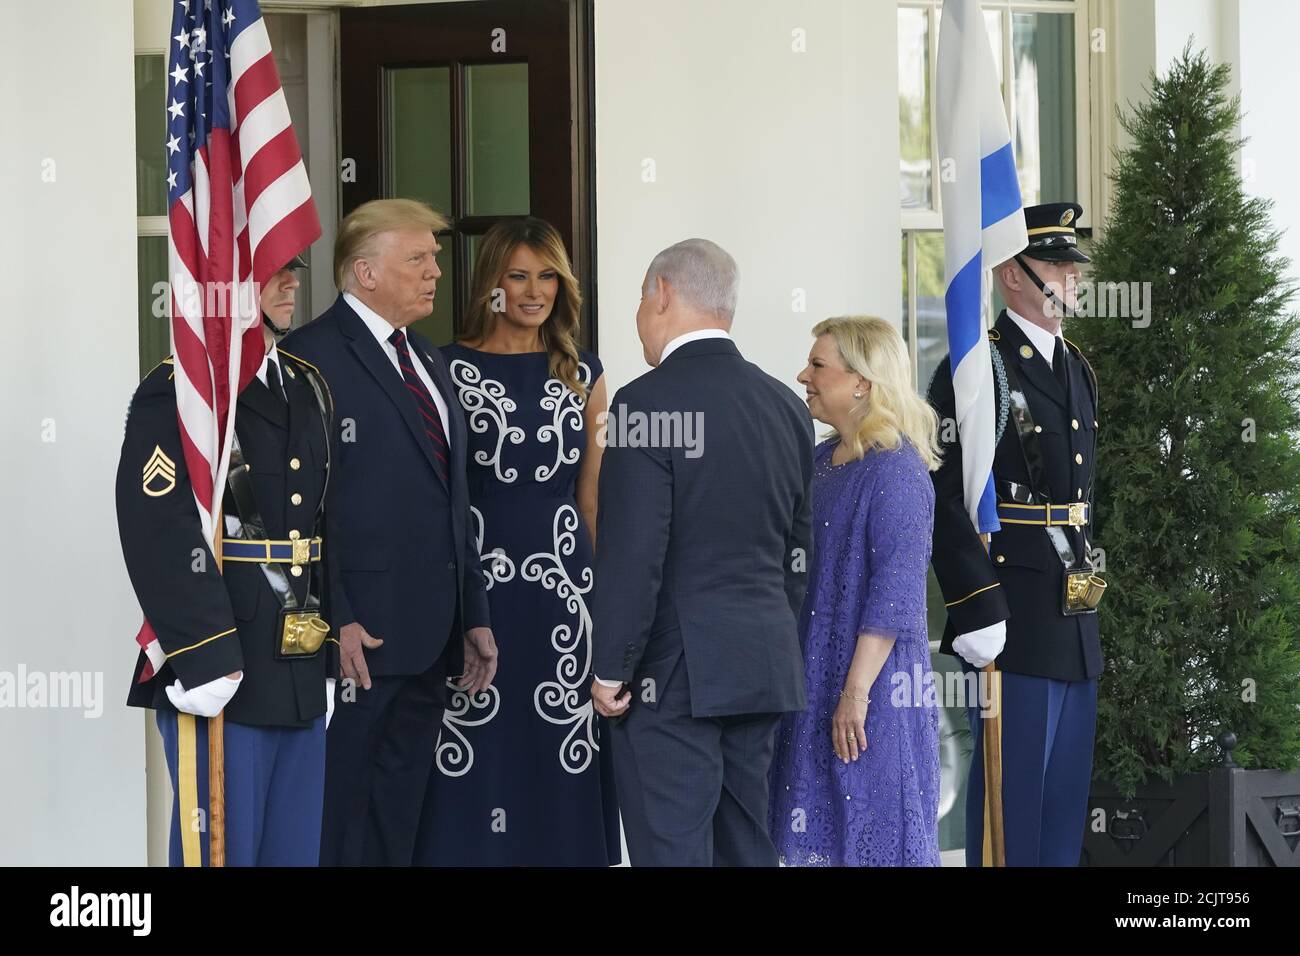 United States President Donald J. Trump and first lady Melania Trump welcomes Prime Minister Benjamin Netanyahu of Israel, and his wife Sara, to the White House in Washington, DC on Tuesday, September 15, 2020. Netanyahu is in Washington to sign the Abraham Accords, a peace treaty with the State of Israel.Credit: Chris Kleponis/Pool via CNP /MediaPunch Stock Photo